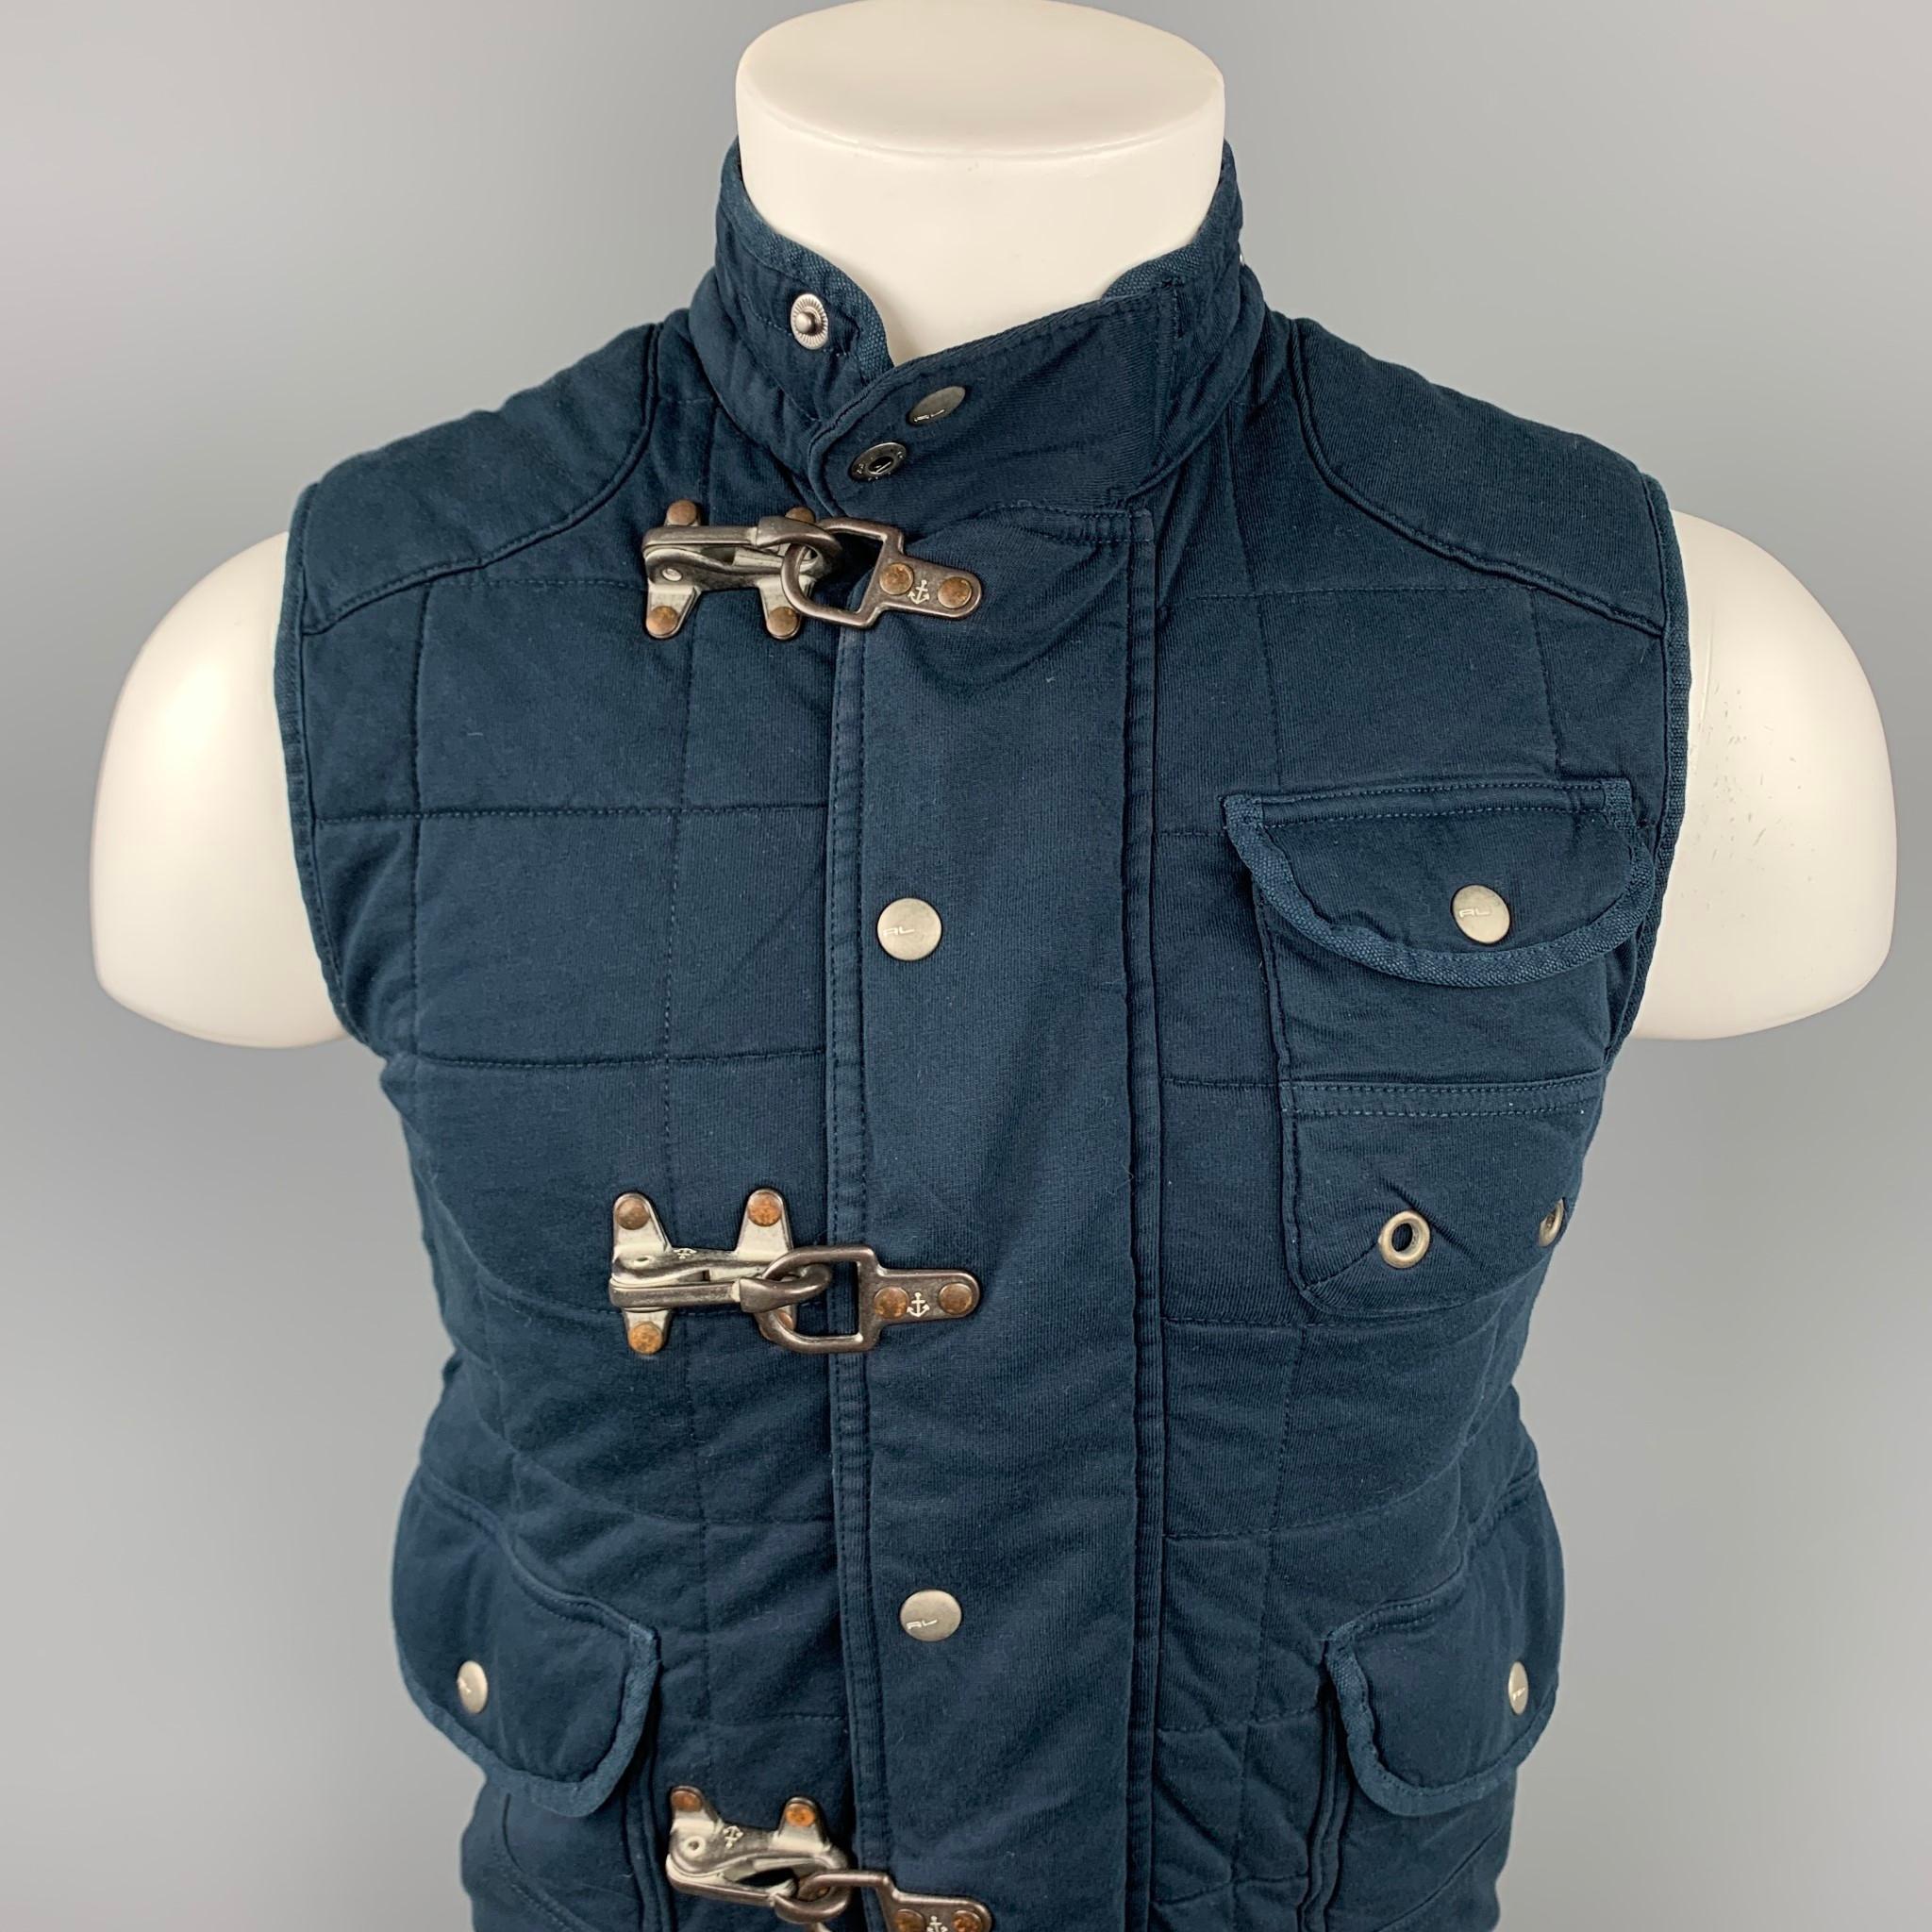 POLO by RALPH LAUREN vest comes in a navy quilted cotton featuring a nautical style, front patch pockets, hook & loop, and zip up closure.

Good Pre-Owned Condition.
Marked: S

Measurements:

Shoulder: 15.5 in.
Chest: 34 in.
Length: 22 in. 